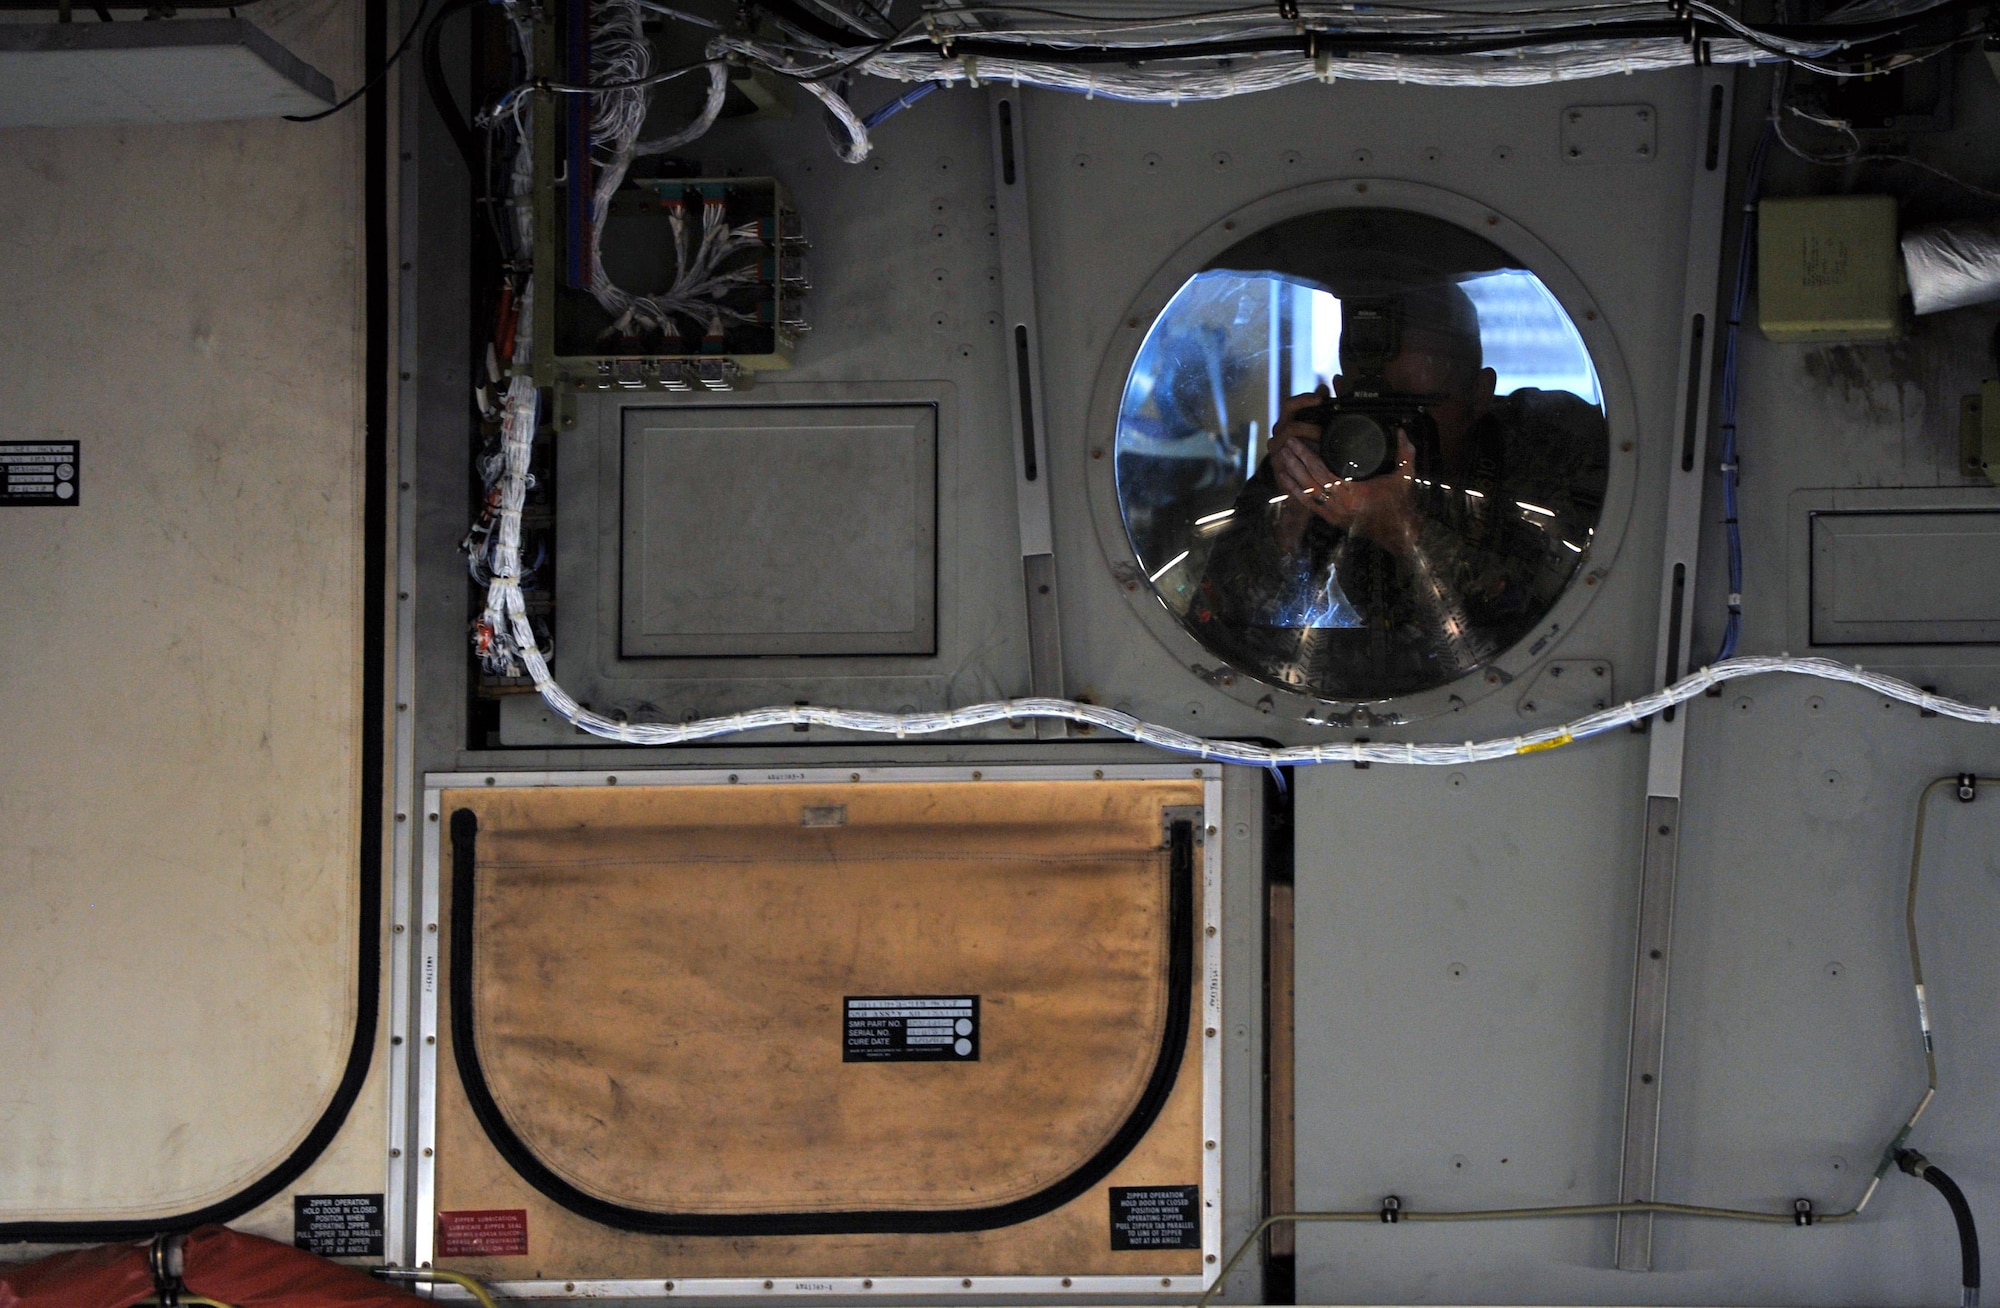 Airman 1st Class Travis Beihl, 81st Training Wing Public Affairs photojournalist, takes photos of Airmen and civilians assigned to Keesler Air Force Base, Miss., from an interior window near the cockpit of a C-17 Globemaster III from Altus Air Force Base, Okla., during an incentive flight, Aug. 4, 2016. The flight was part of a weeklong hurricane exercise to prepare Keesler for the current hurricane season. (U.S. Air Force photo by Senior Airman Duncan McElroy/Released)